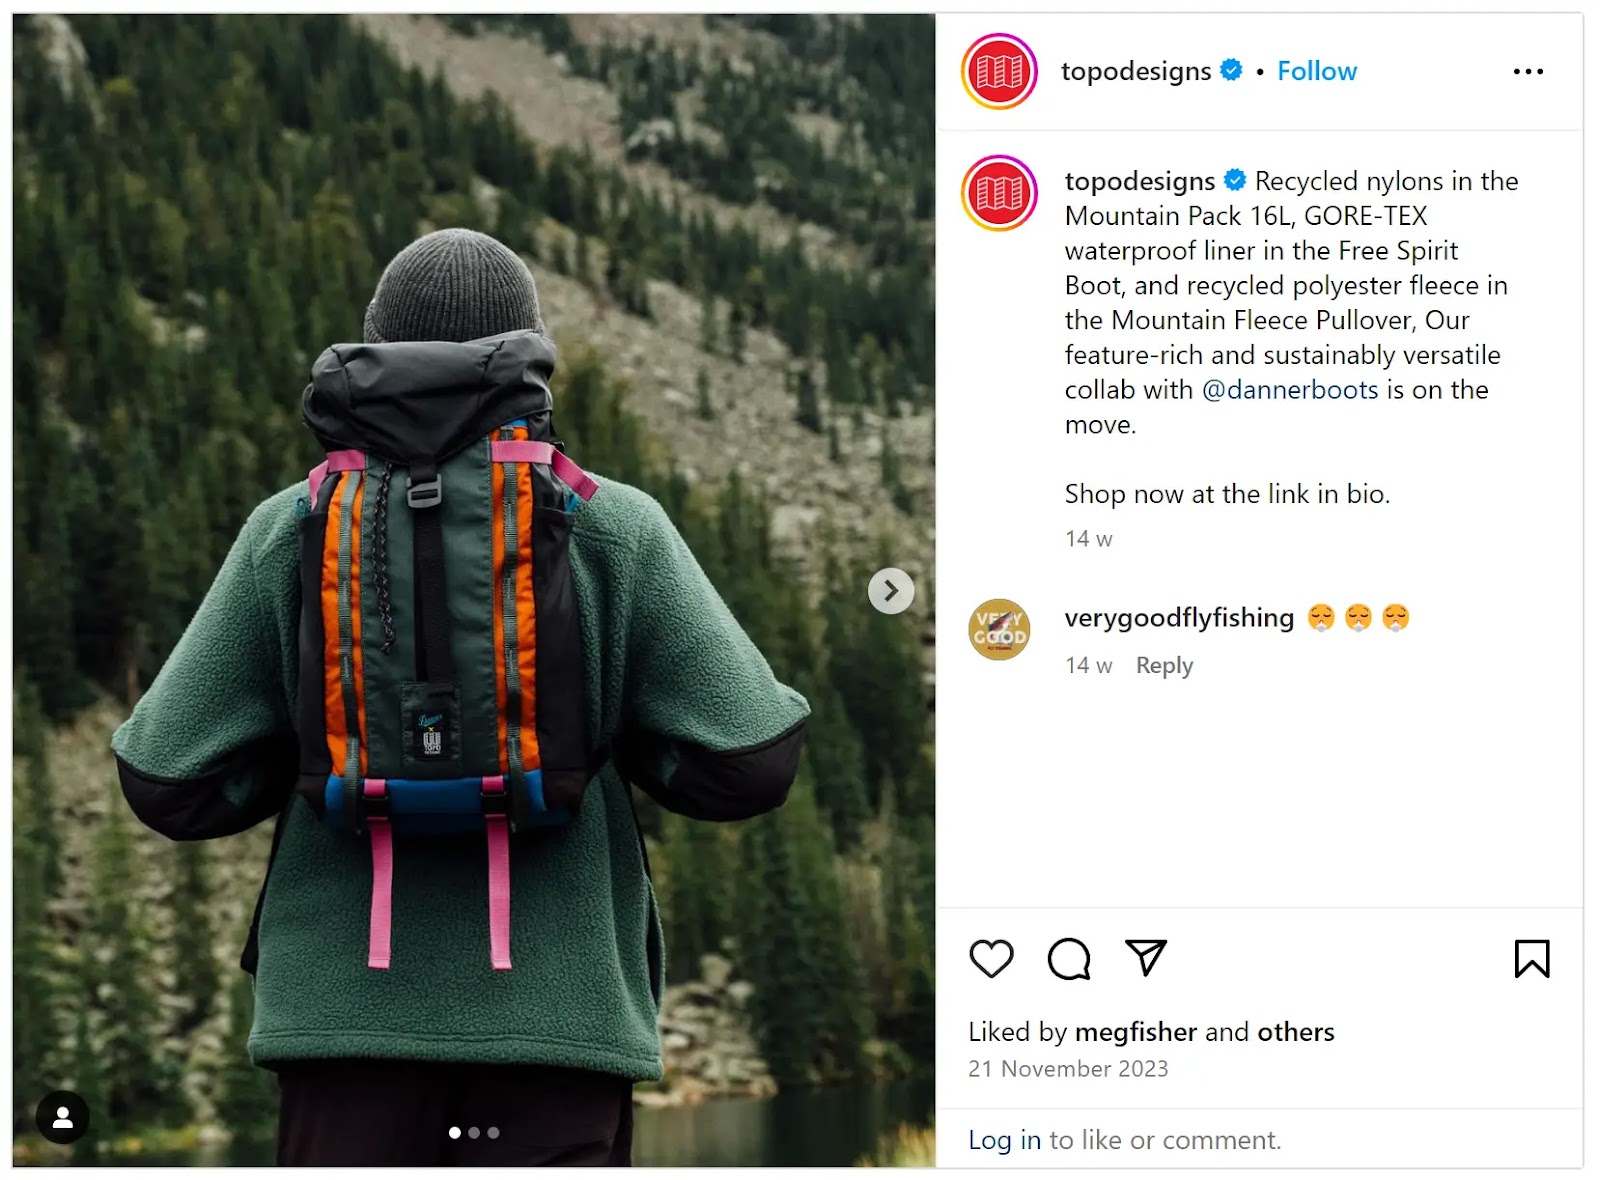 Instagram post from outdoor apparel company Topo Designs, promoting their products